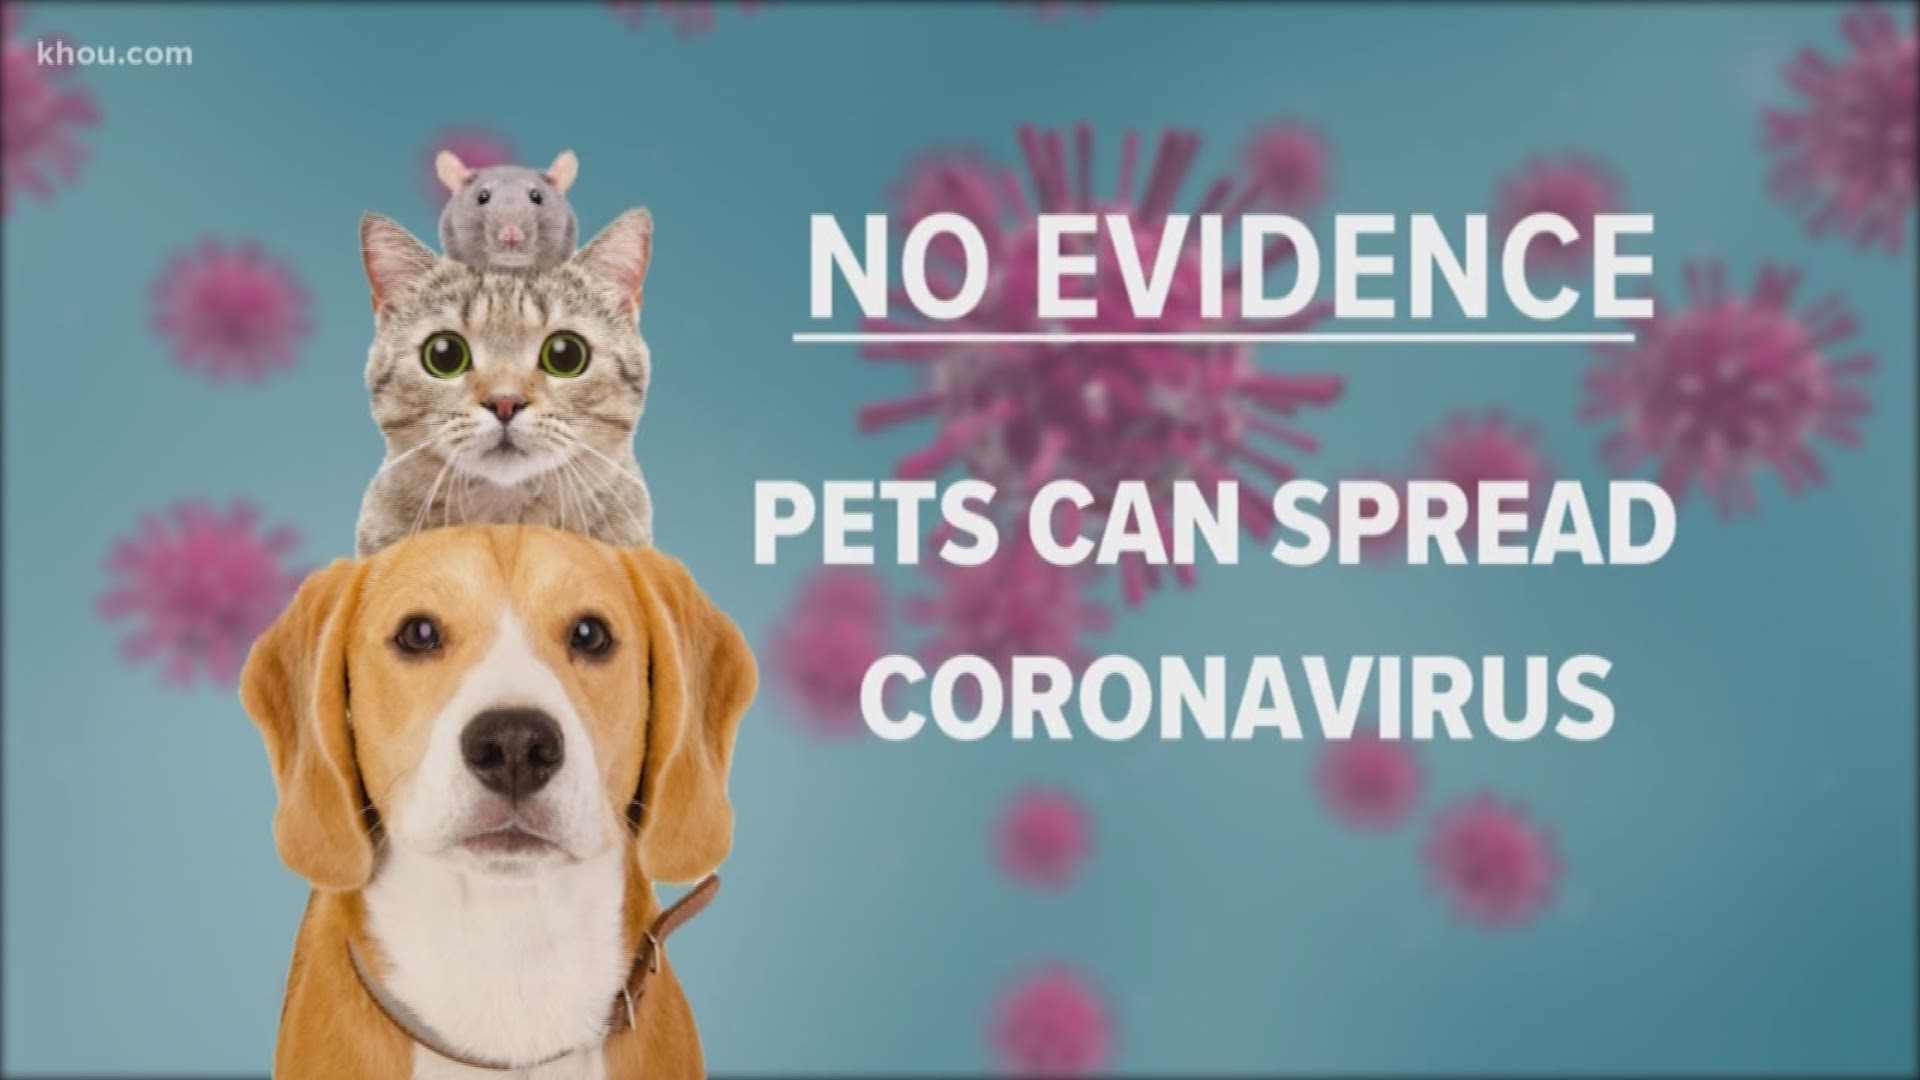 The Houston Humane Society says there is no evidence pets can spread COVID-19.